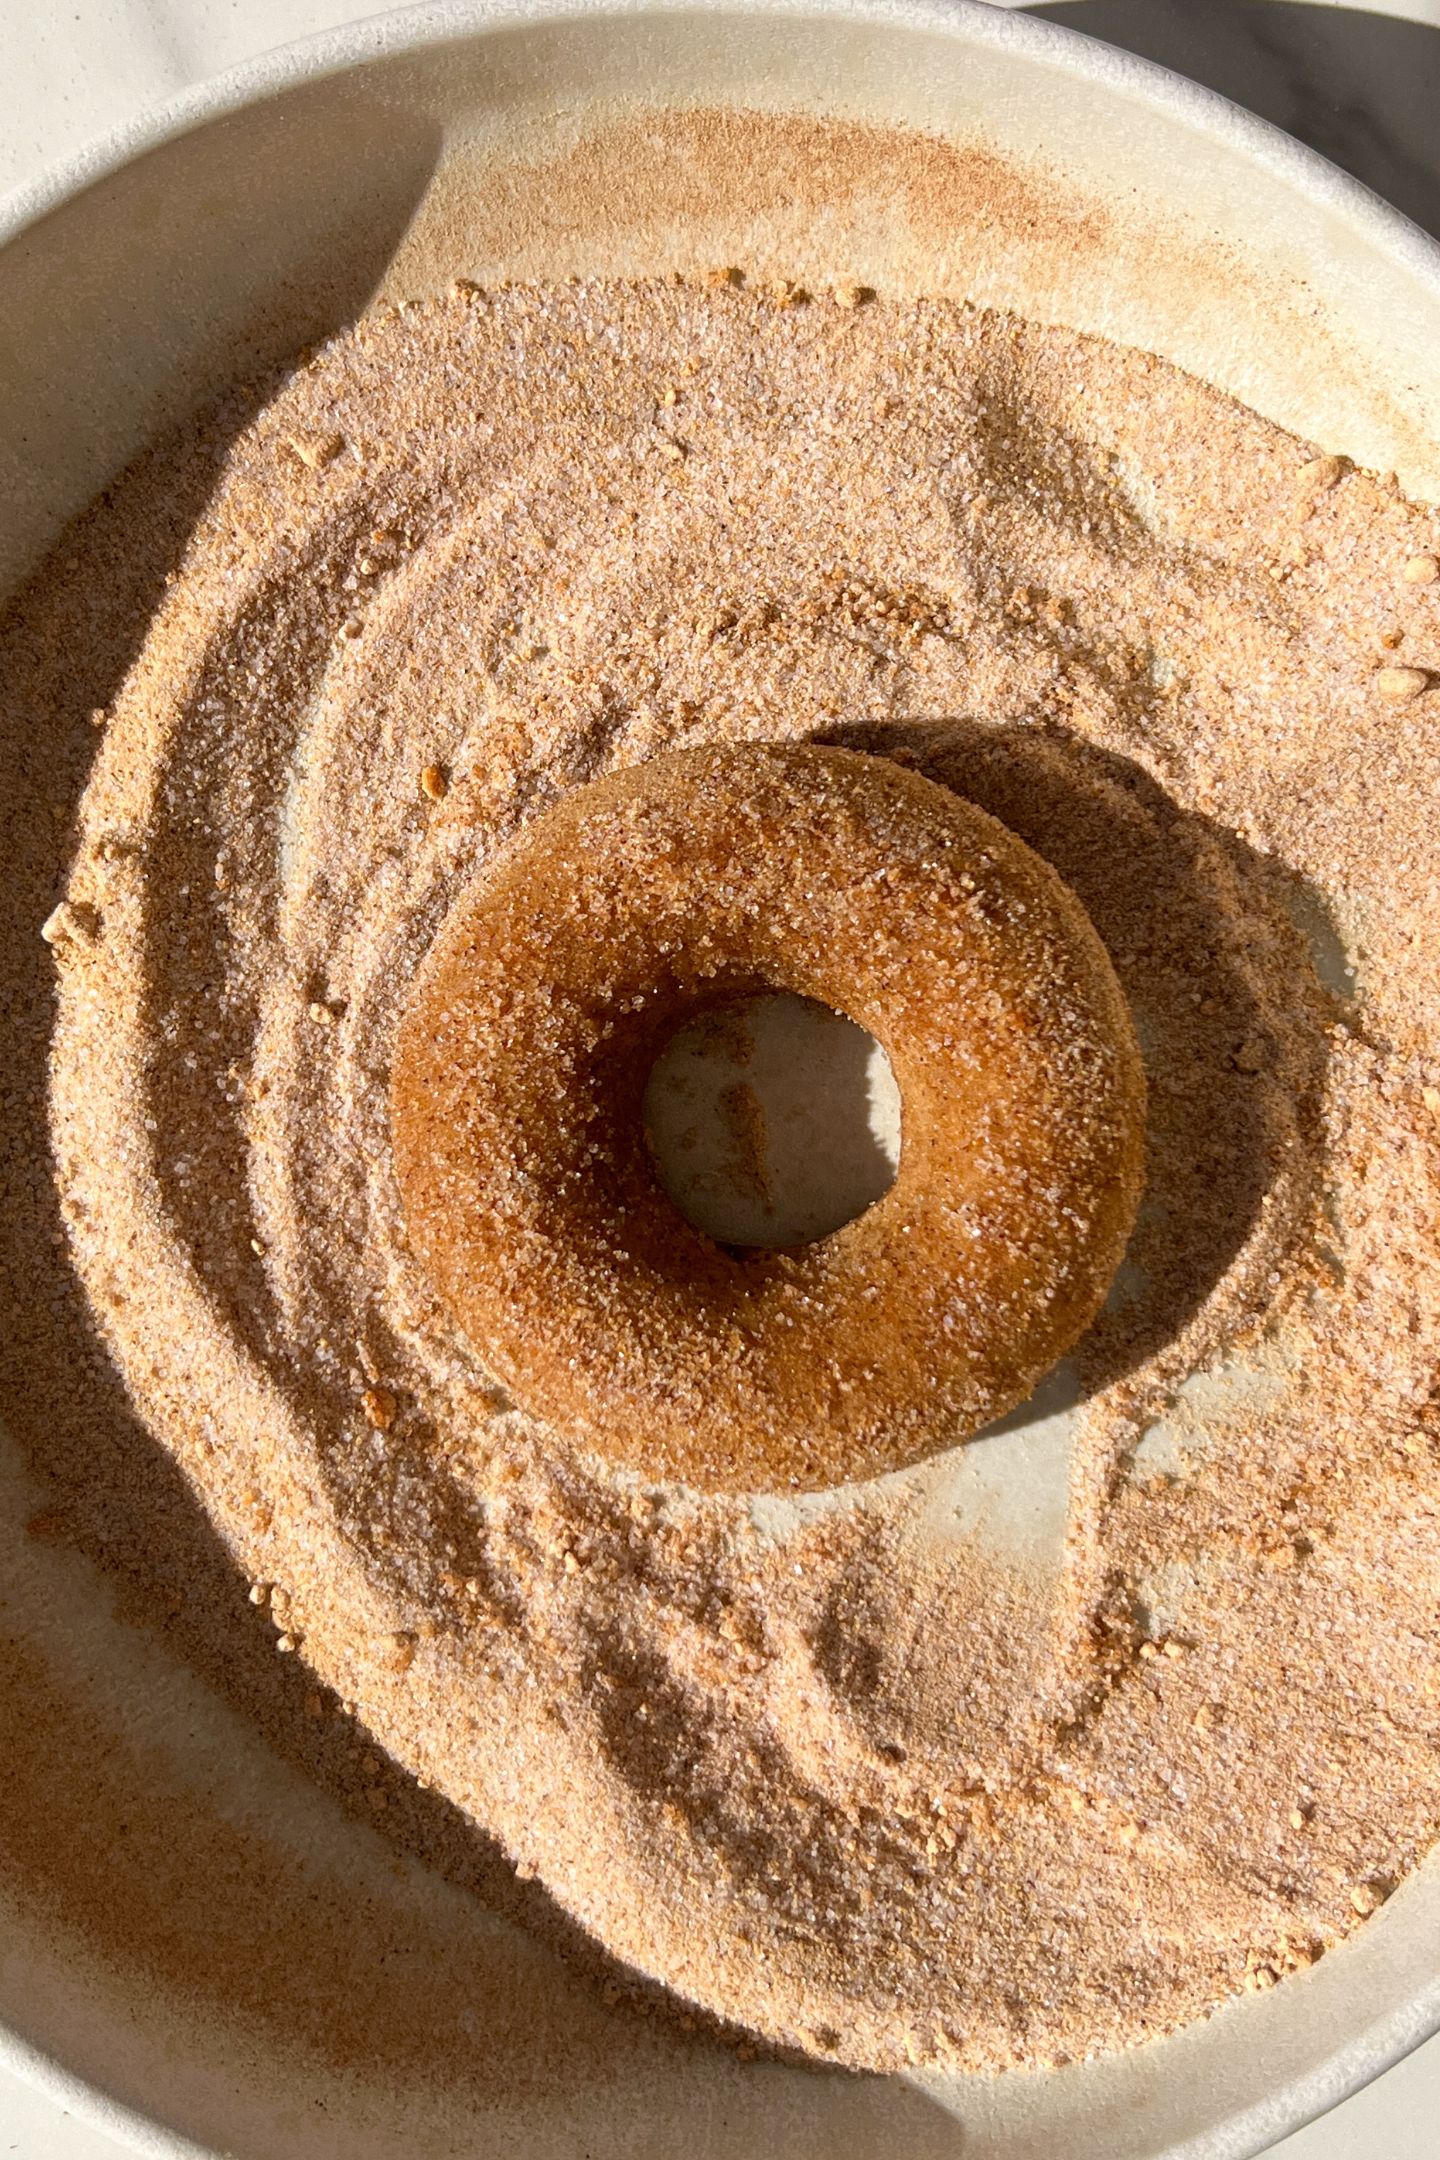 Donut in a bowl with cinnamon and sugar mixture